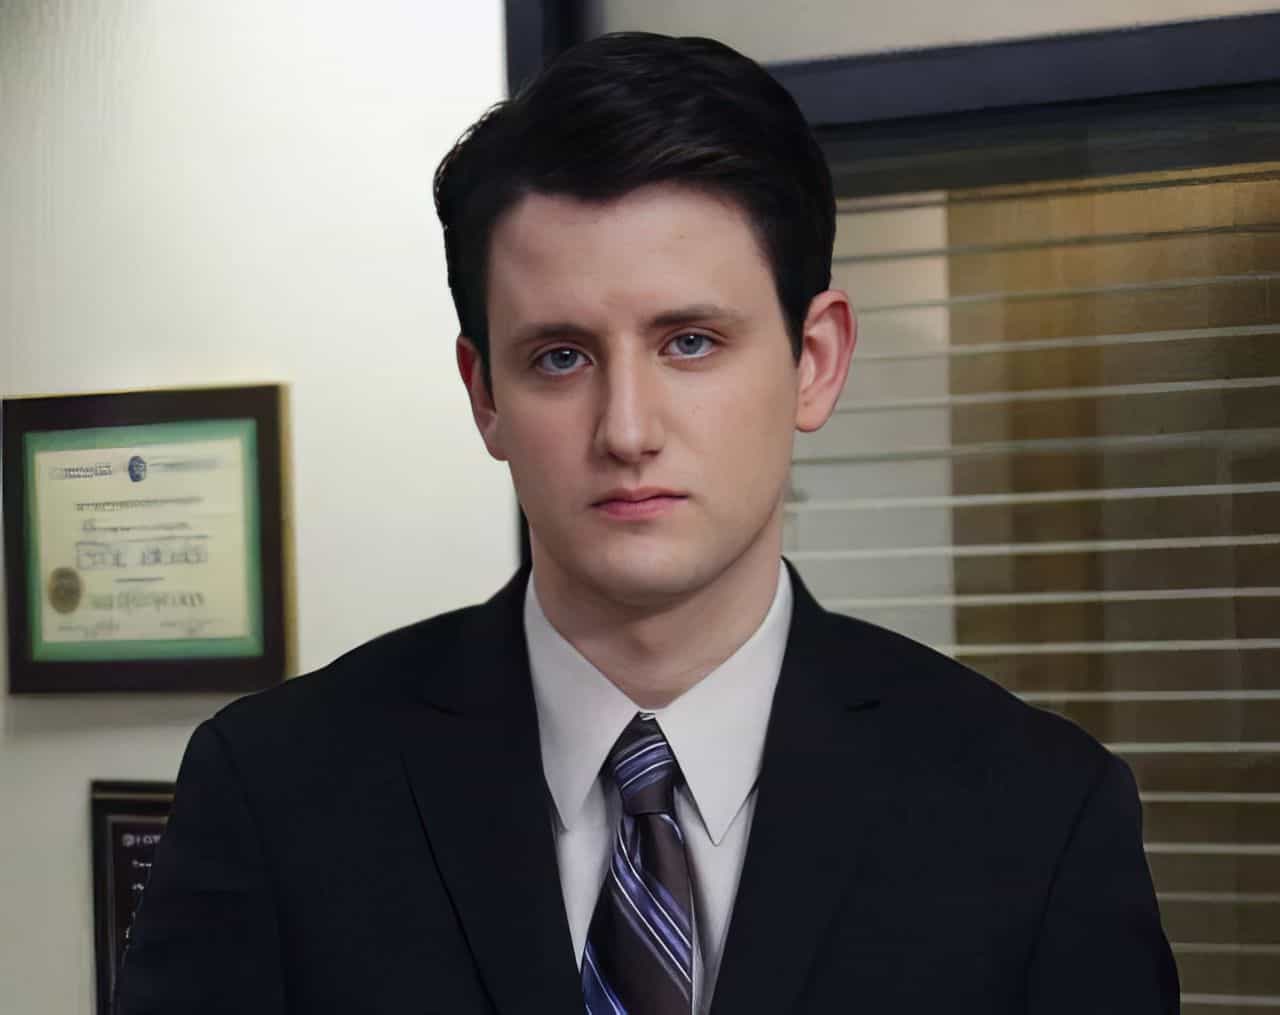 Gabe From The Office The Best Dressed Man in Scranton 5